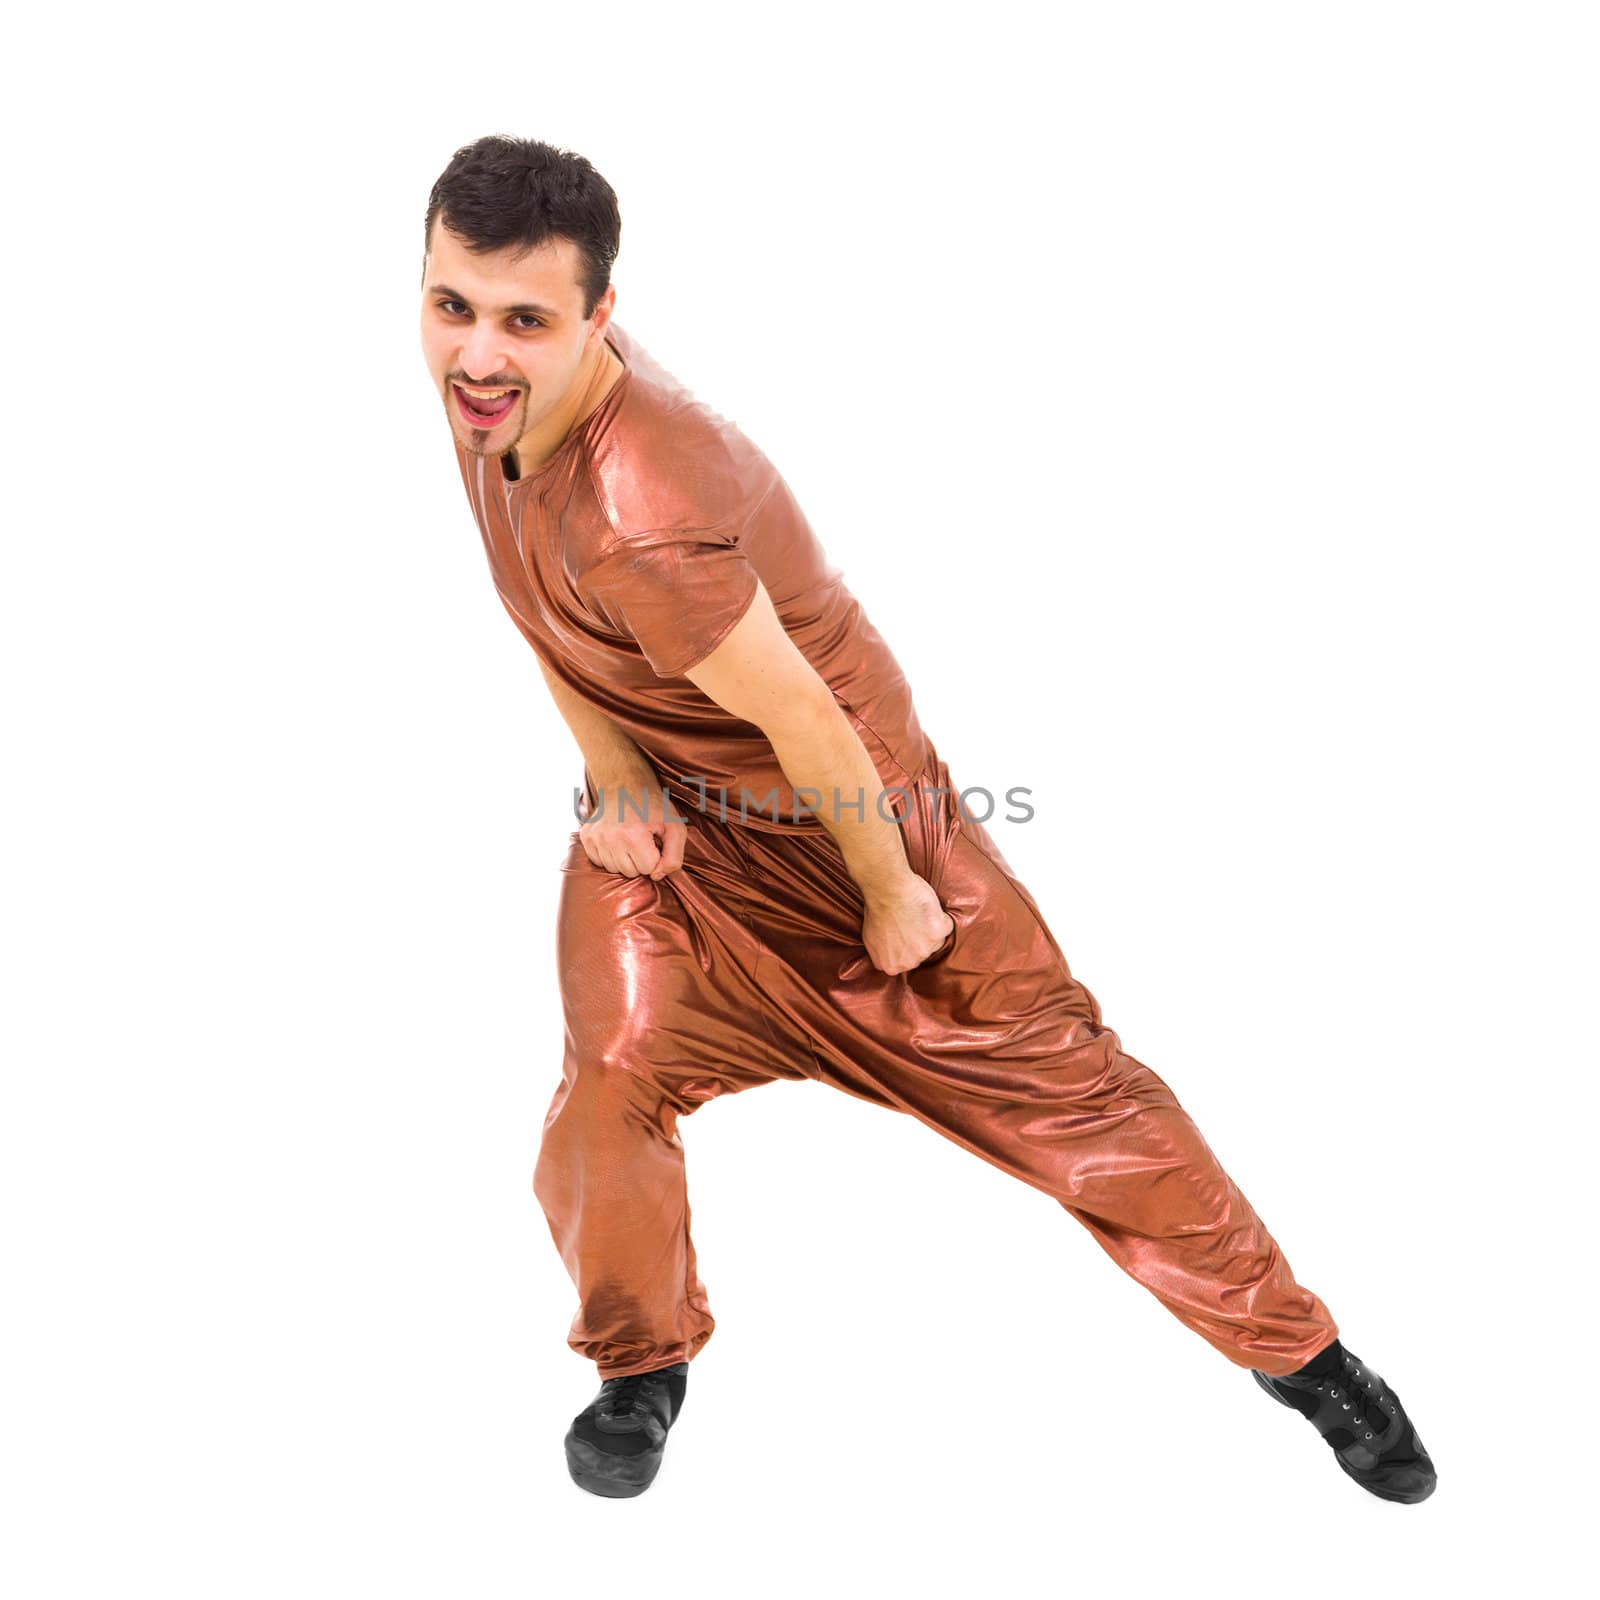 Attractive dancer showing some movements against isolated white background